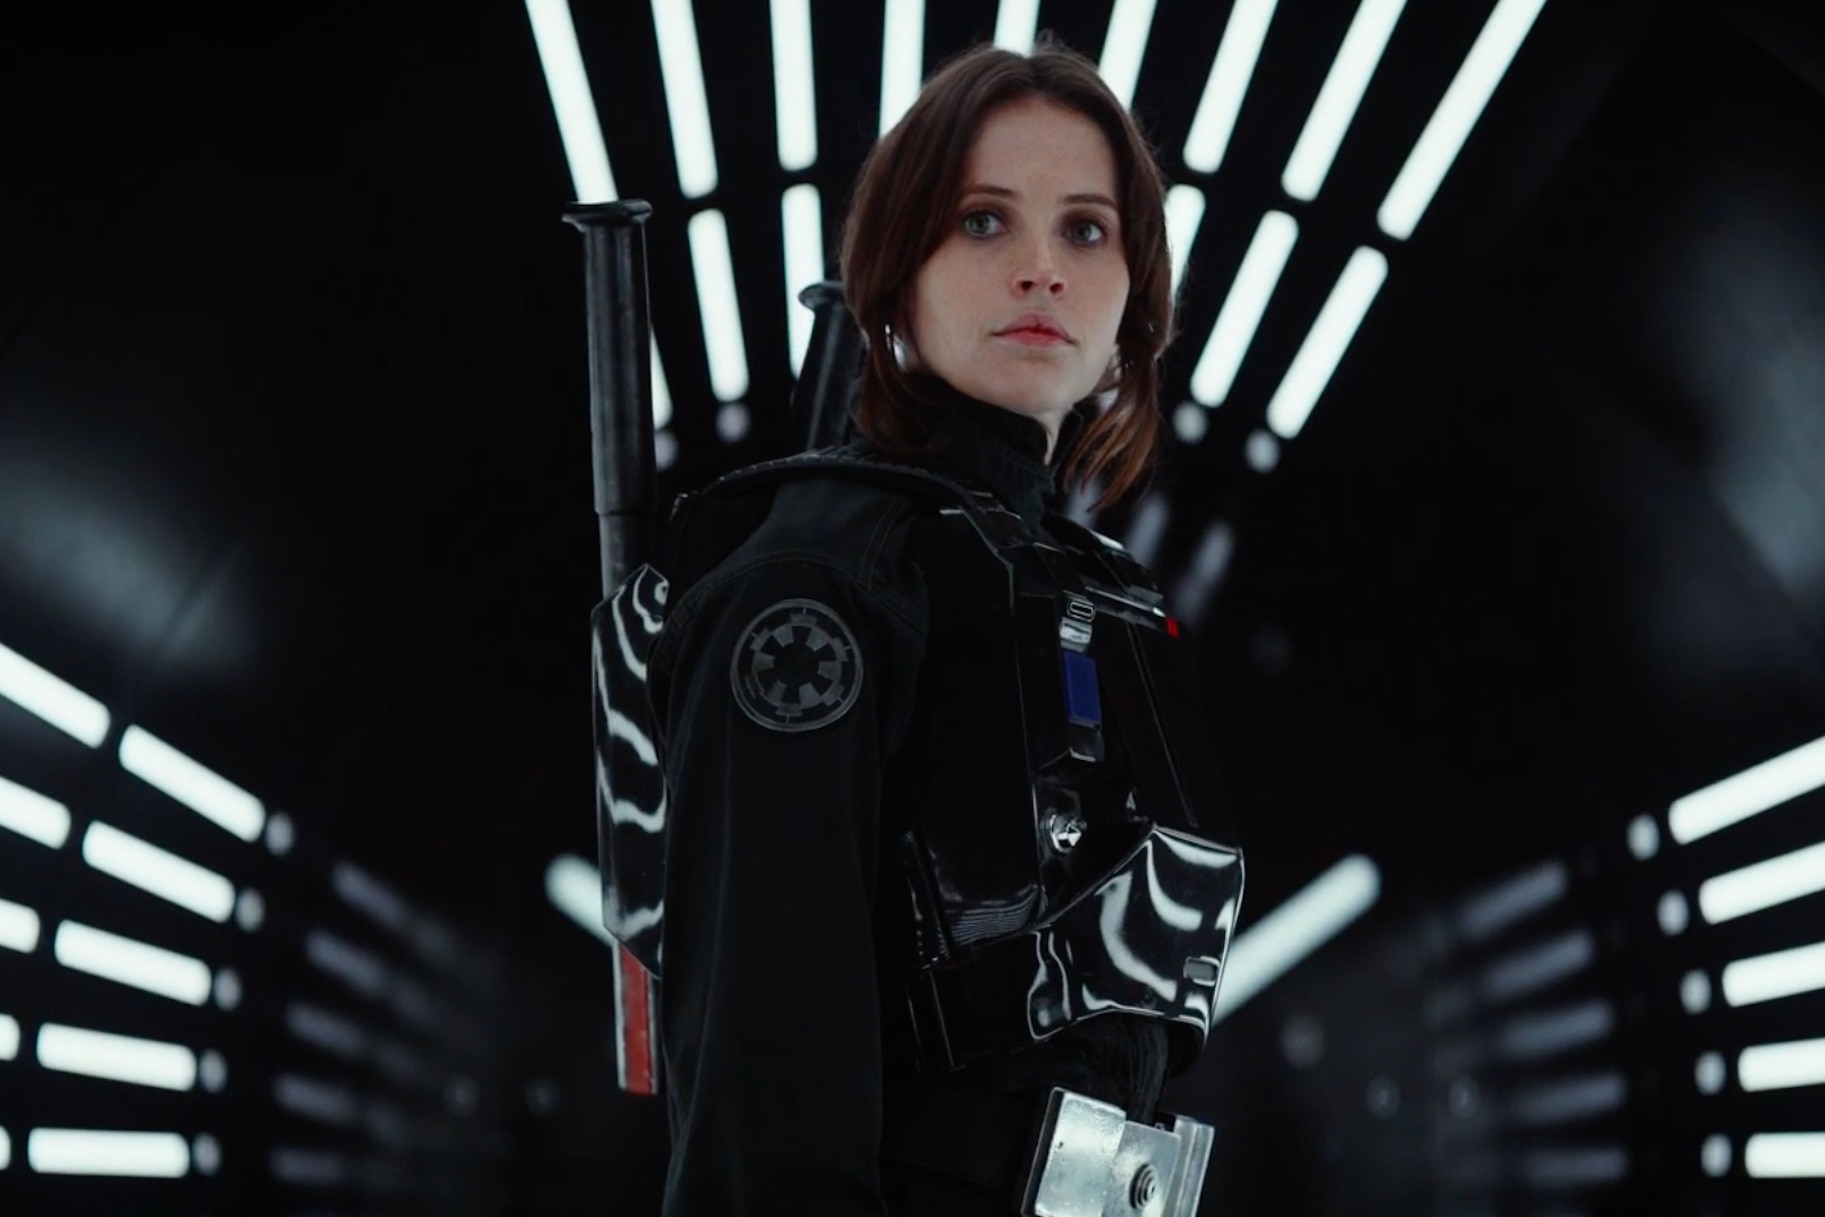 New Star Wars Trailer Introduces A New Badass Female Lead Very Real 